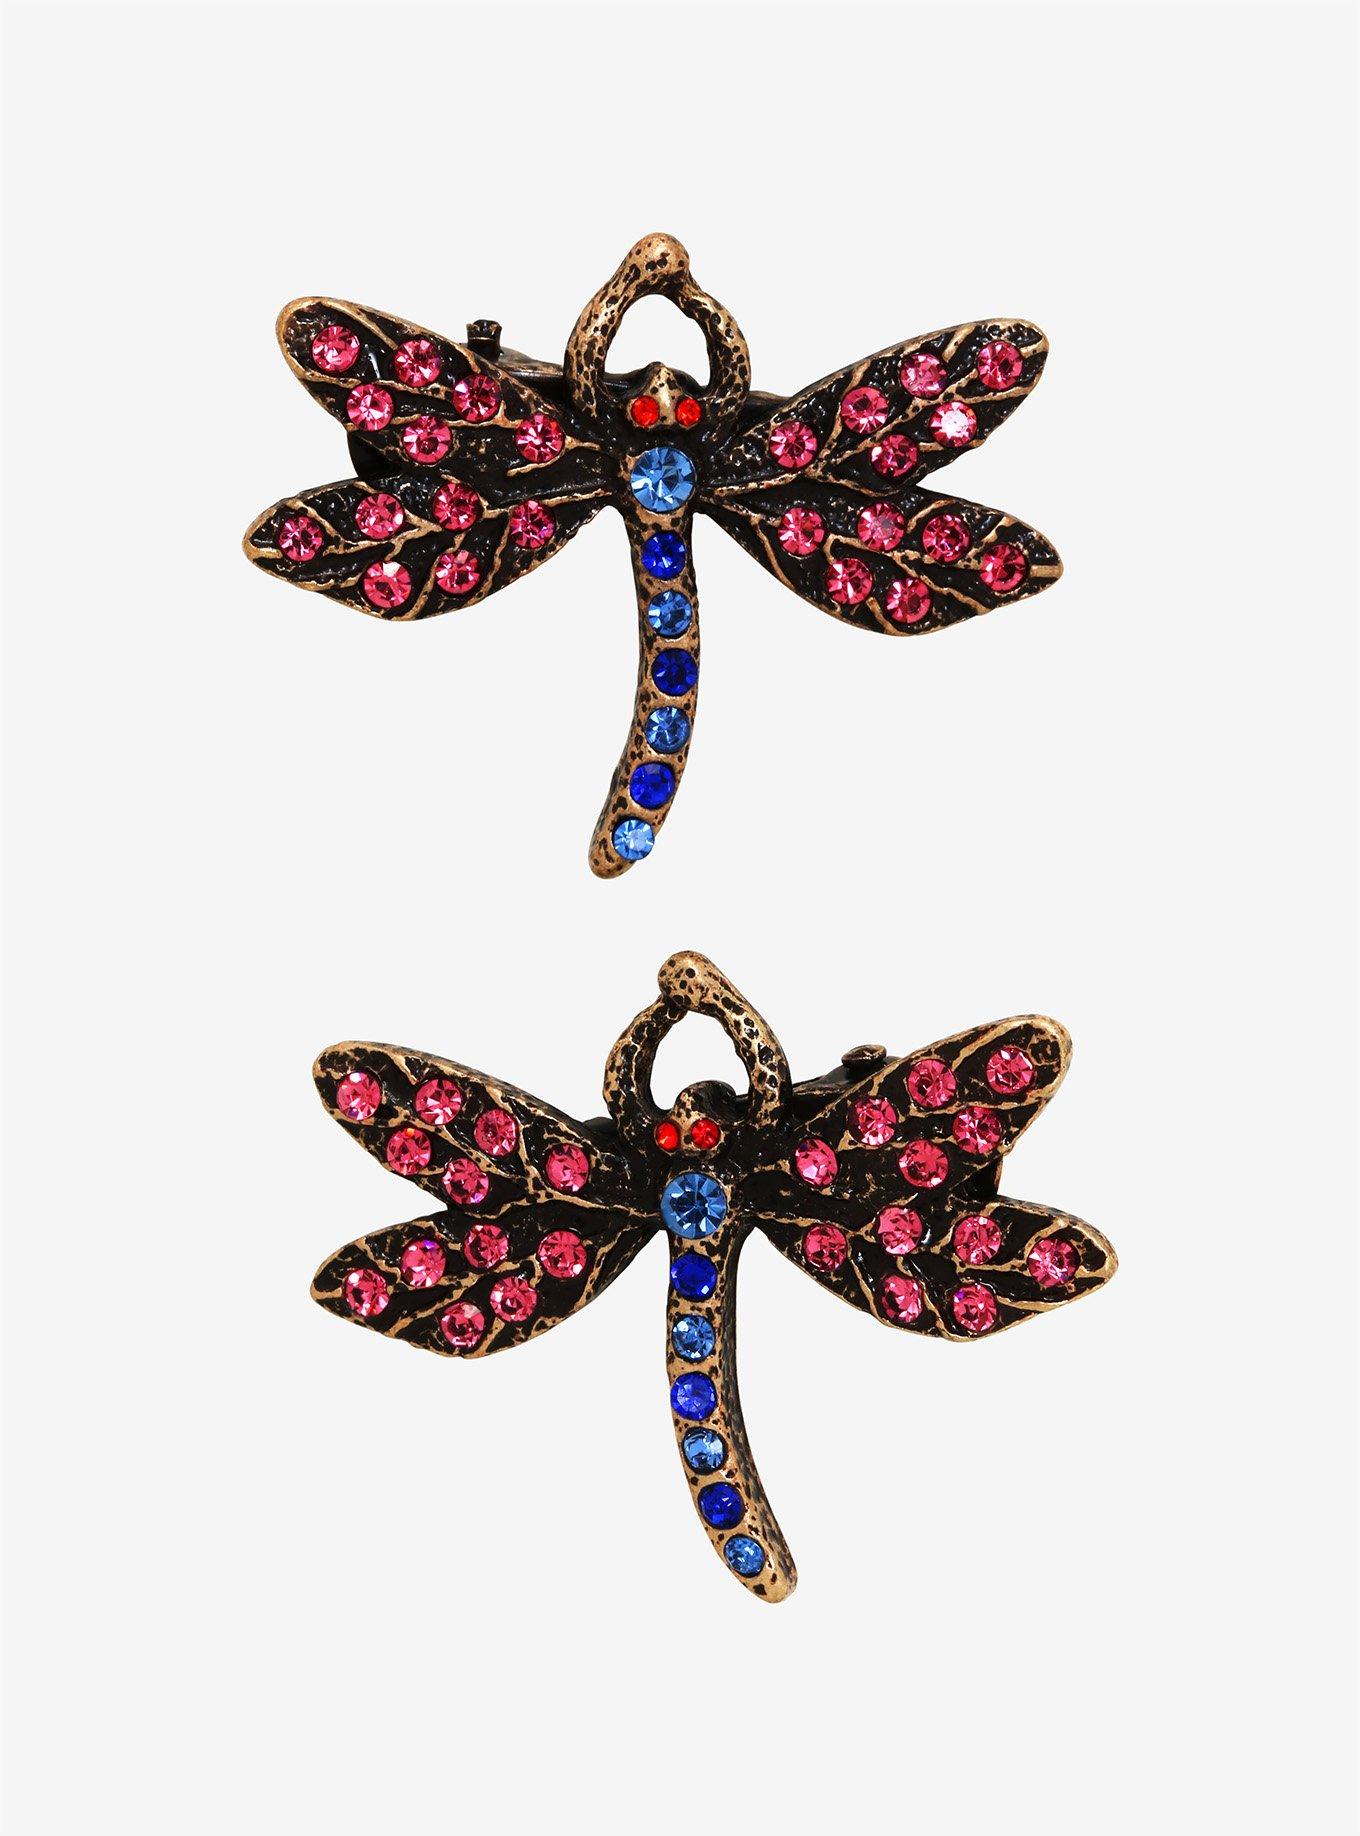 Coraline Dragonfly Hair Clip Set - BoxLunch Exclusive